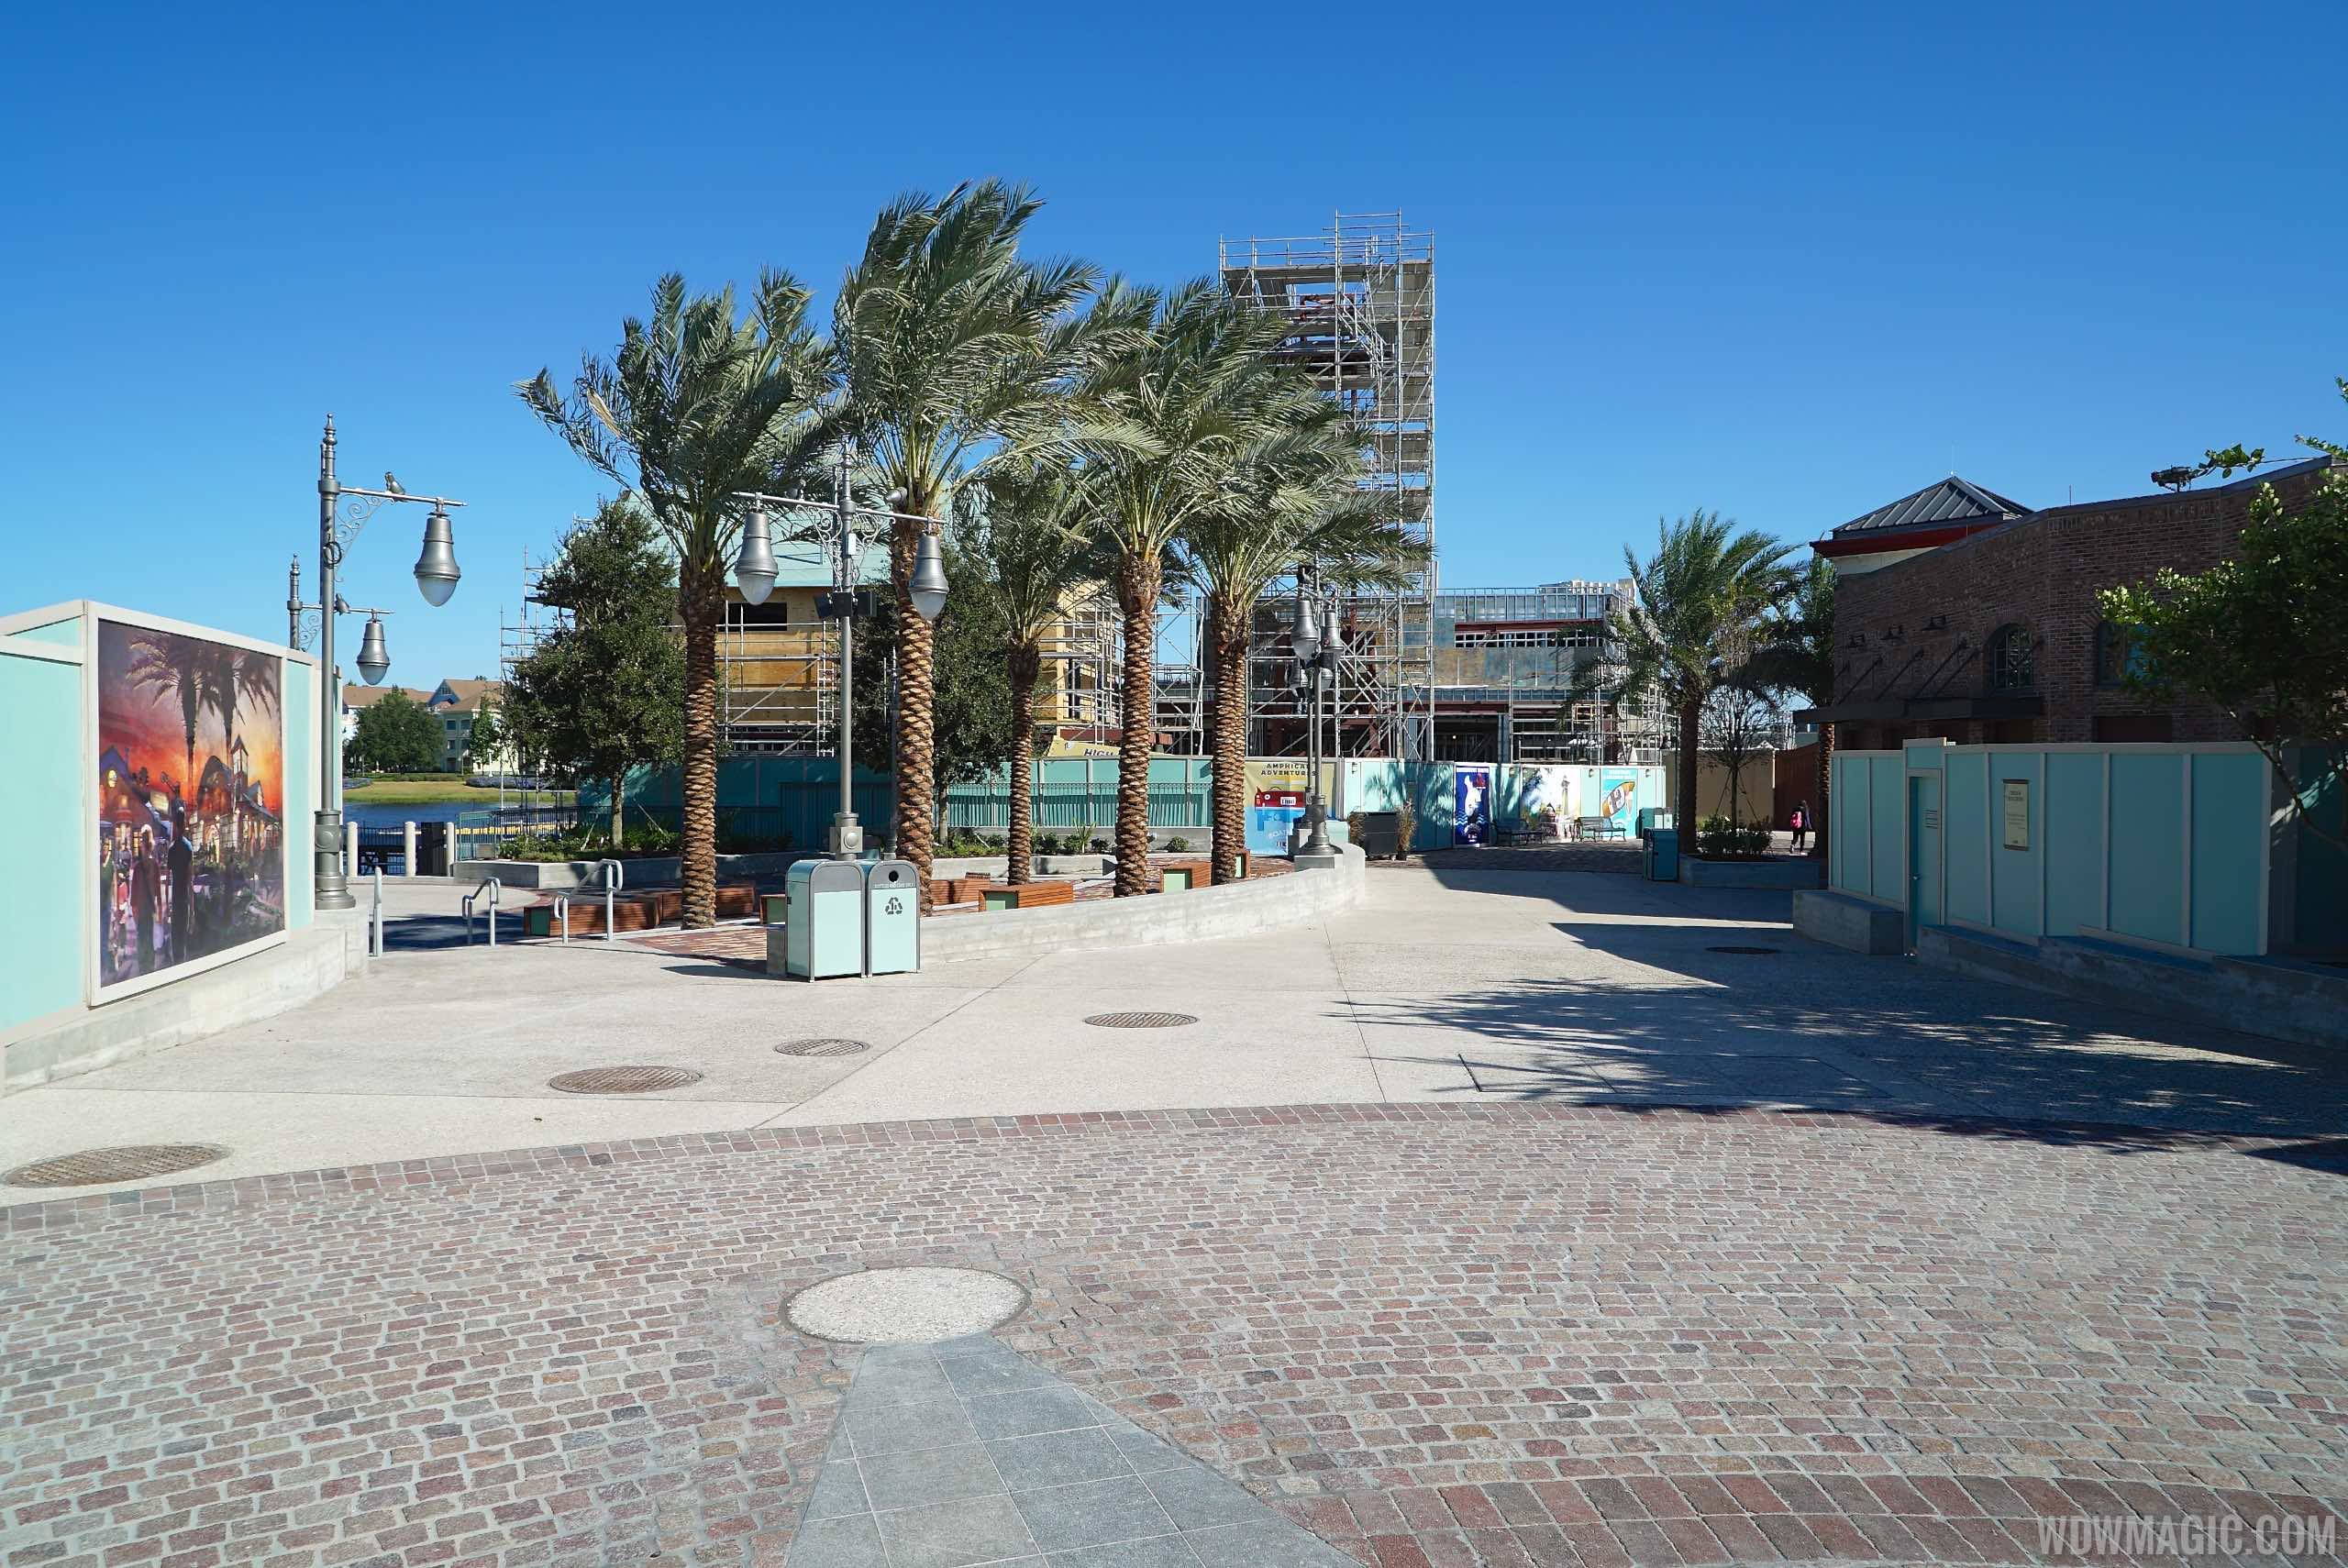 PHOTOS - Waterside Park and section of The Landing opens at Disney Springs